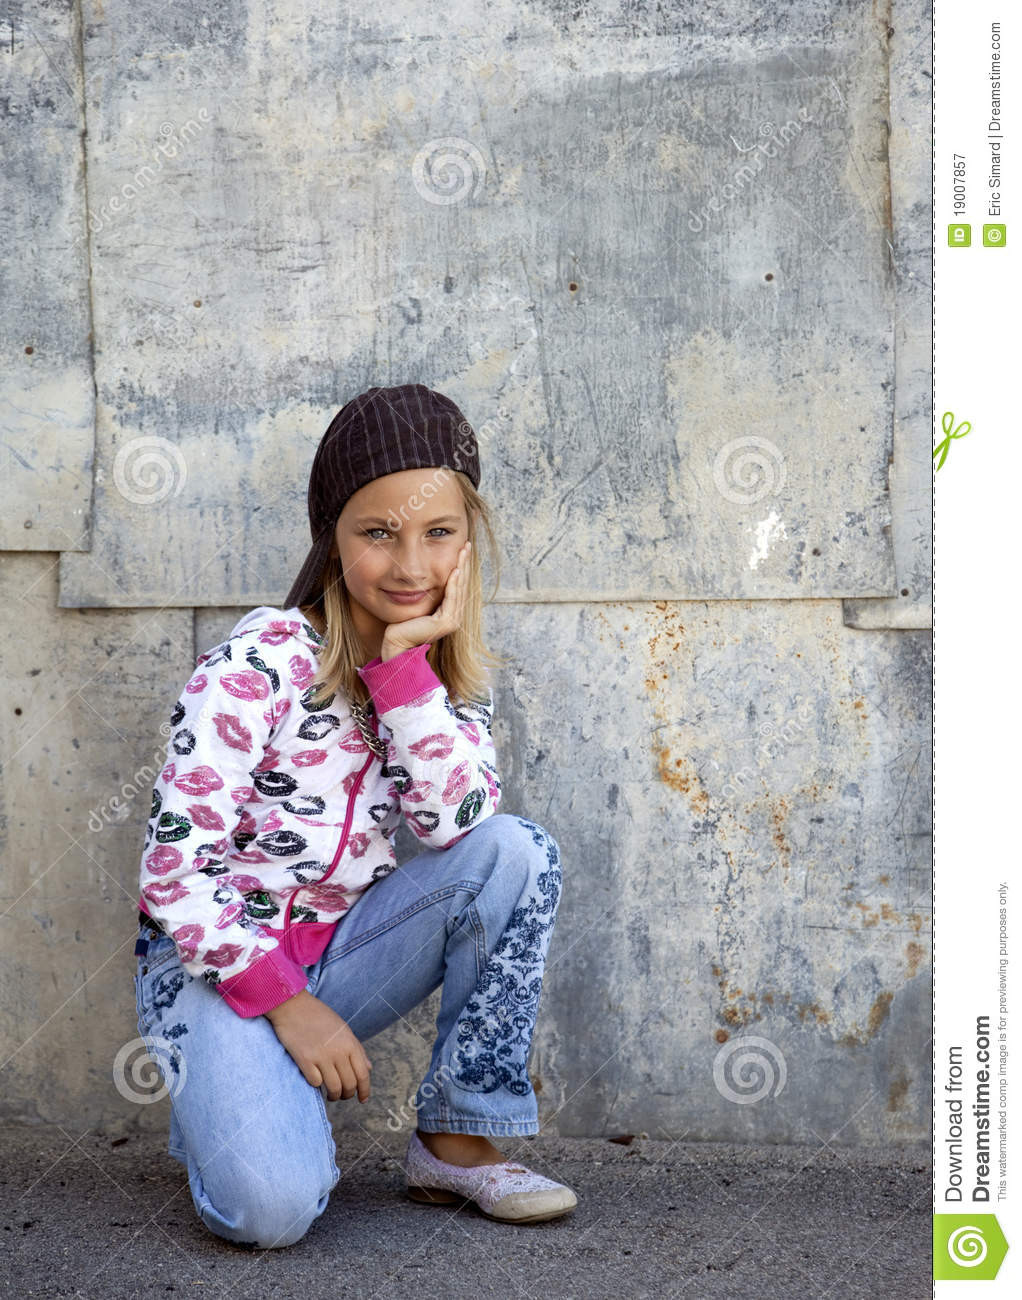 Child Fashion Photography
 Kids Fashion stock image Image of blonde outdoor front